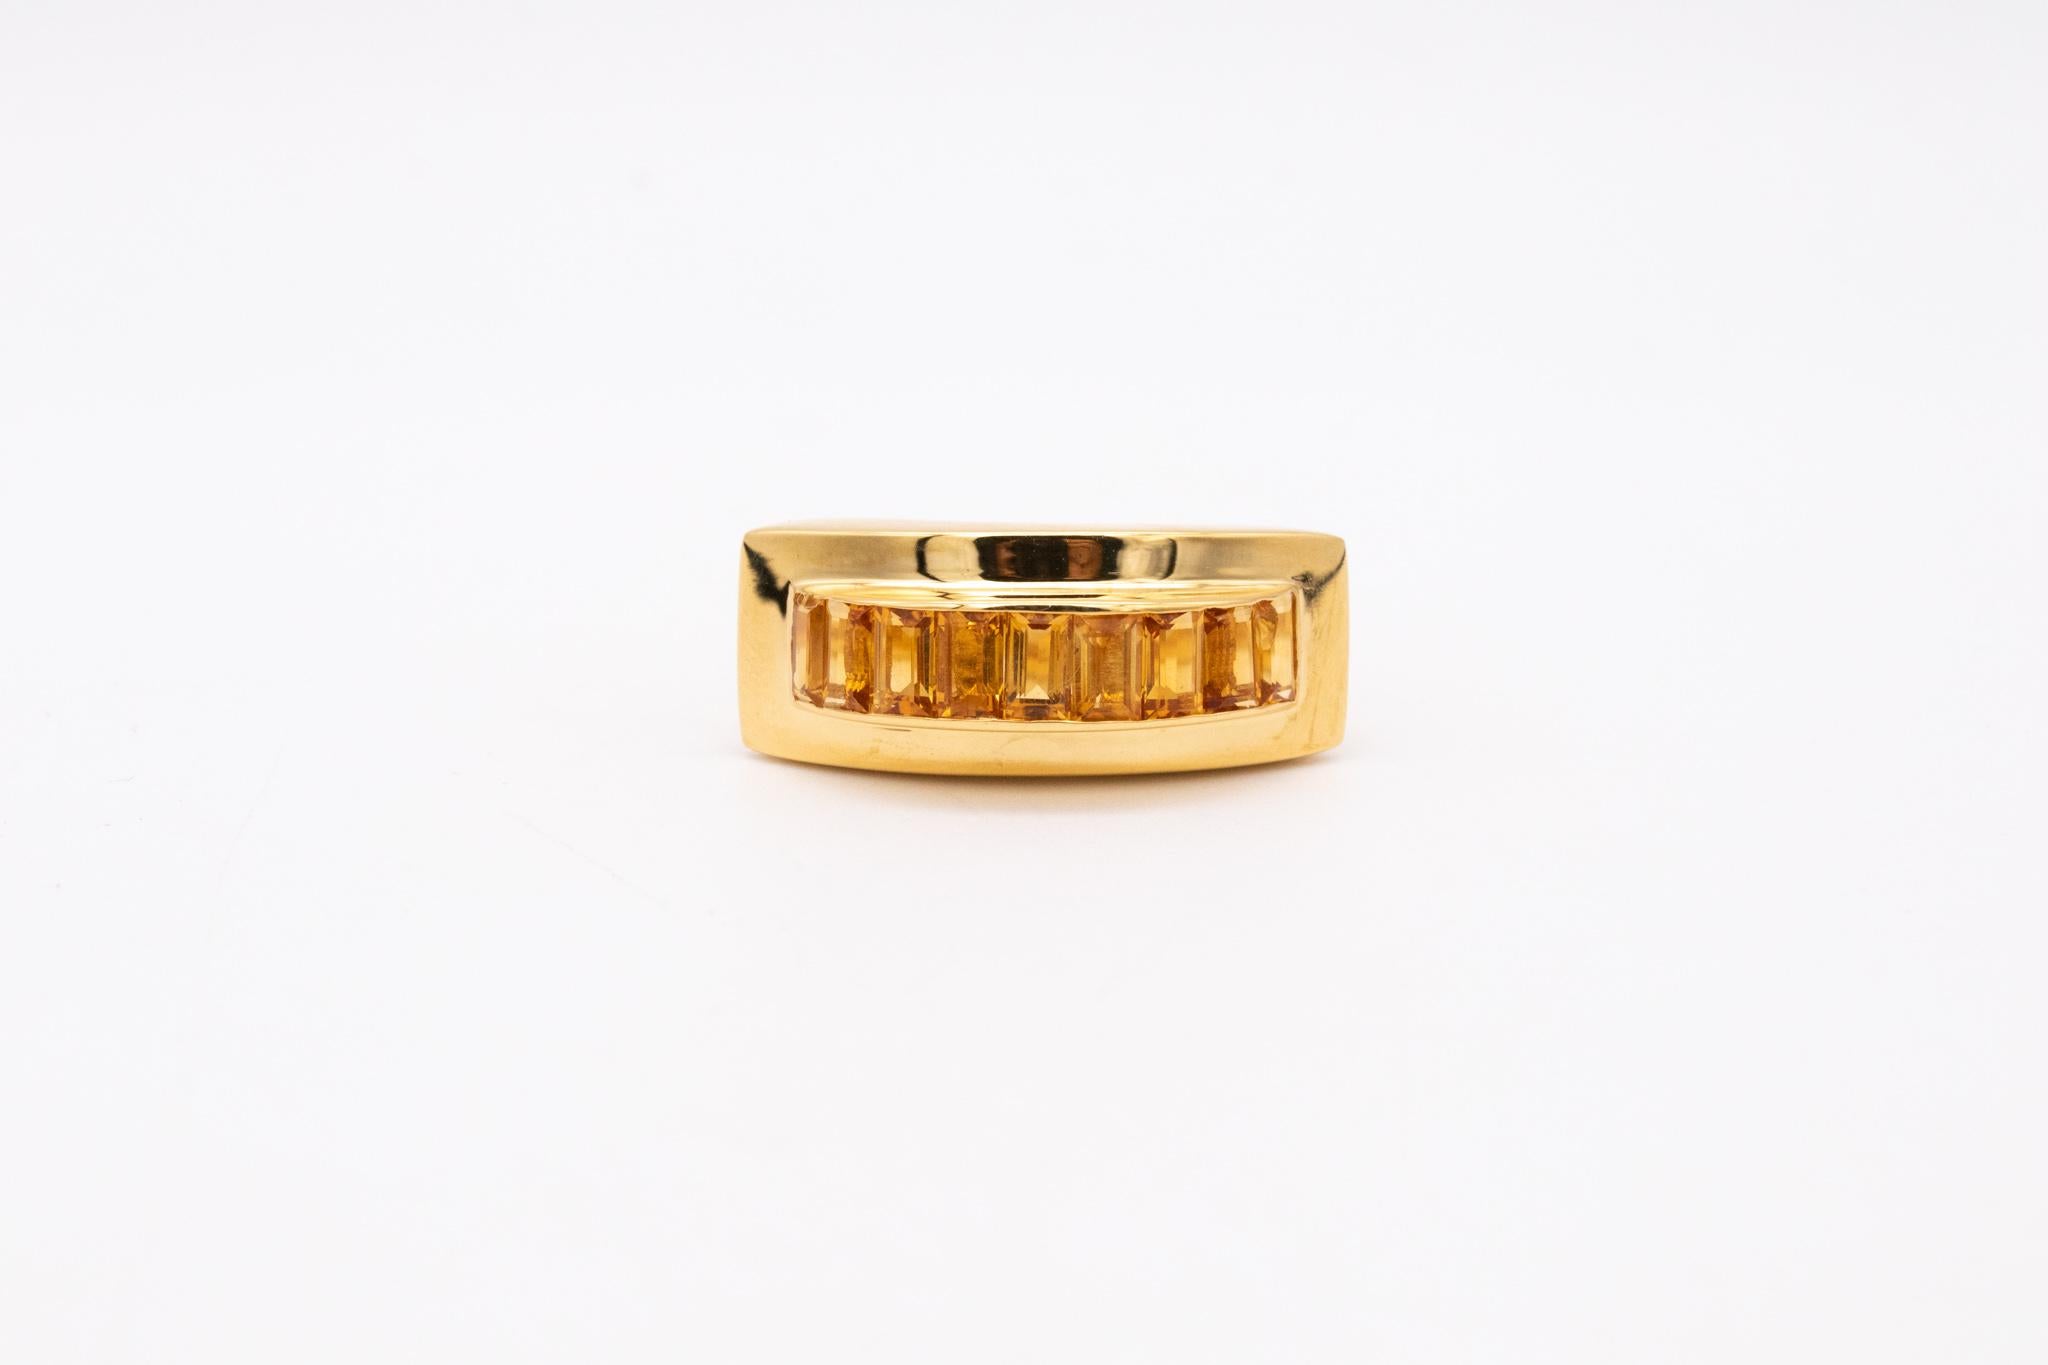 Art Deco 1940 American Geometric Tank Ring 18Kt Gold 4.5 Cts Caliber Citrines For Sale 1